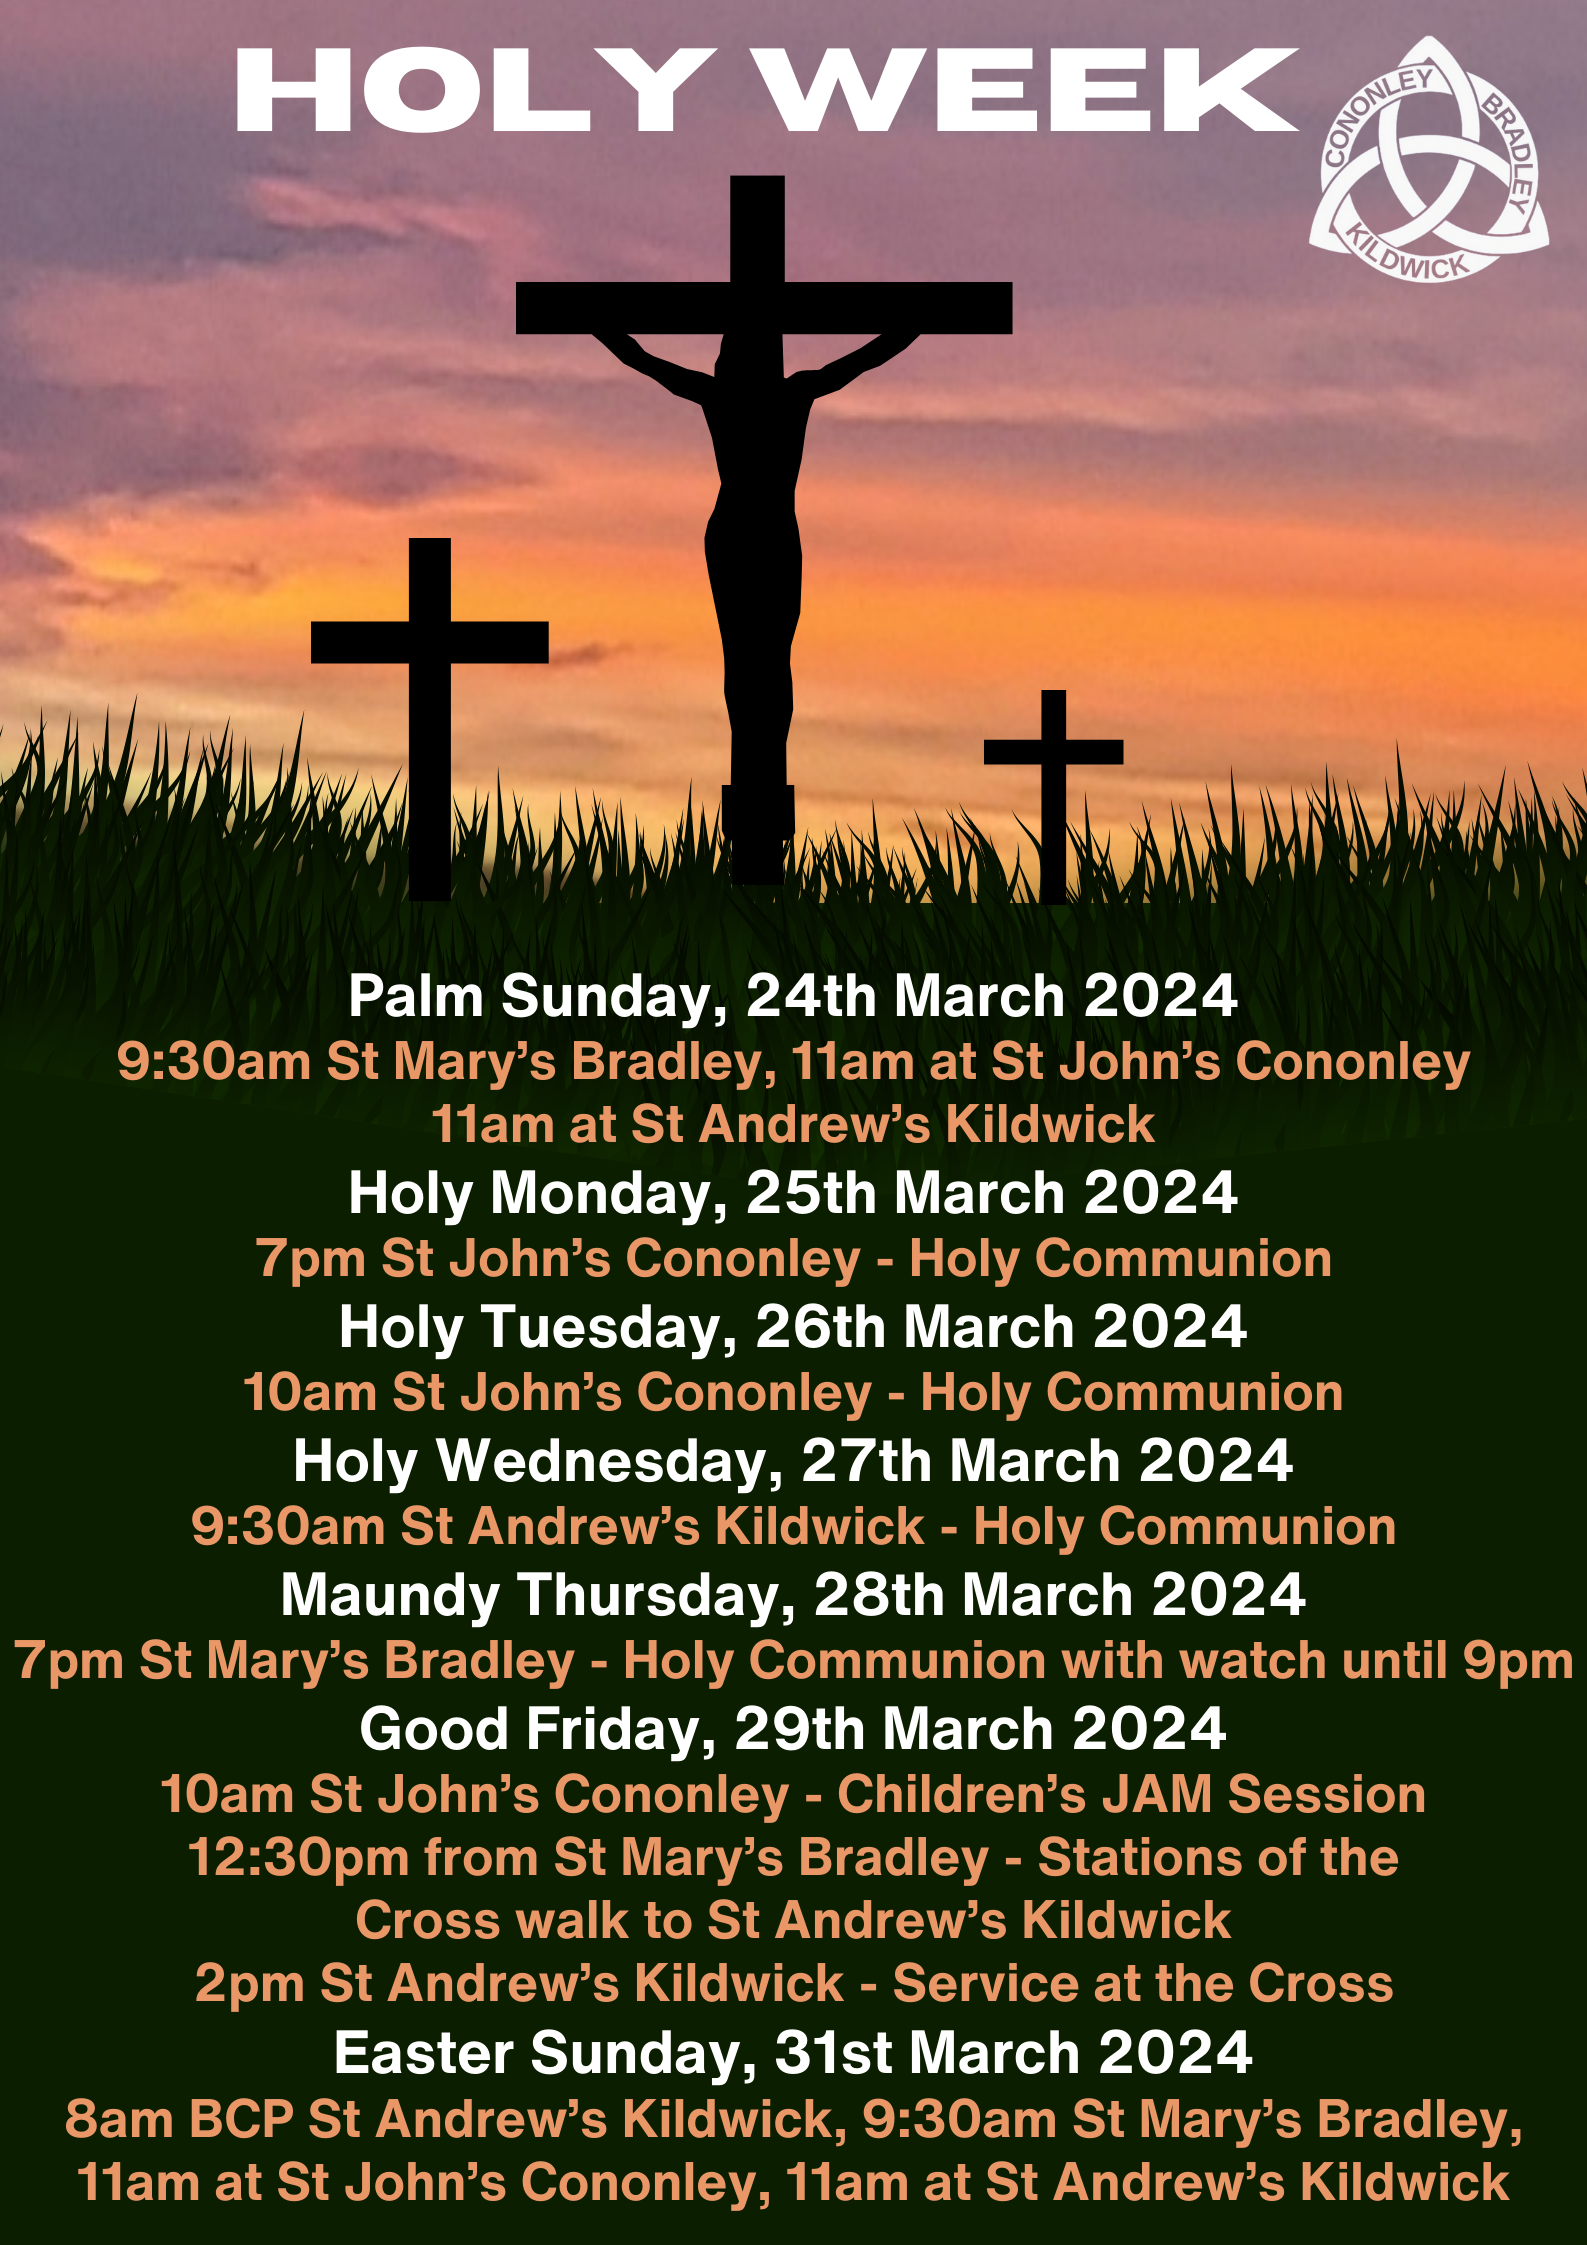 Holy Week Services across the parish